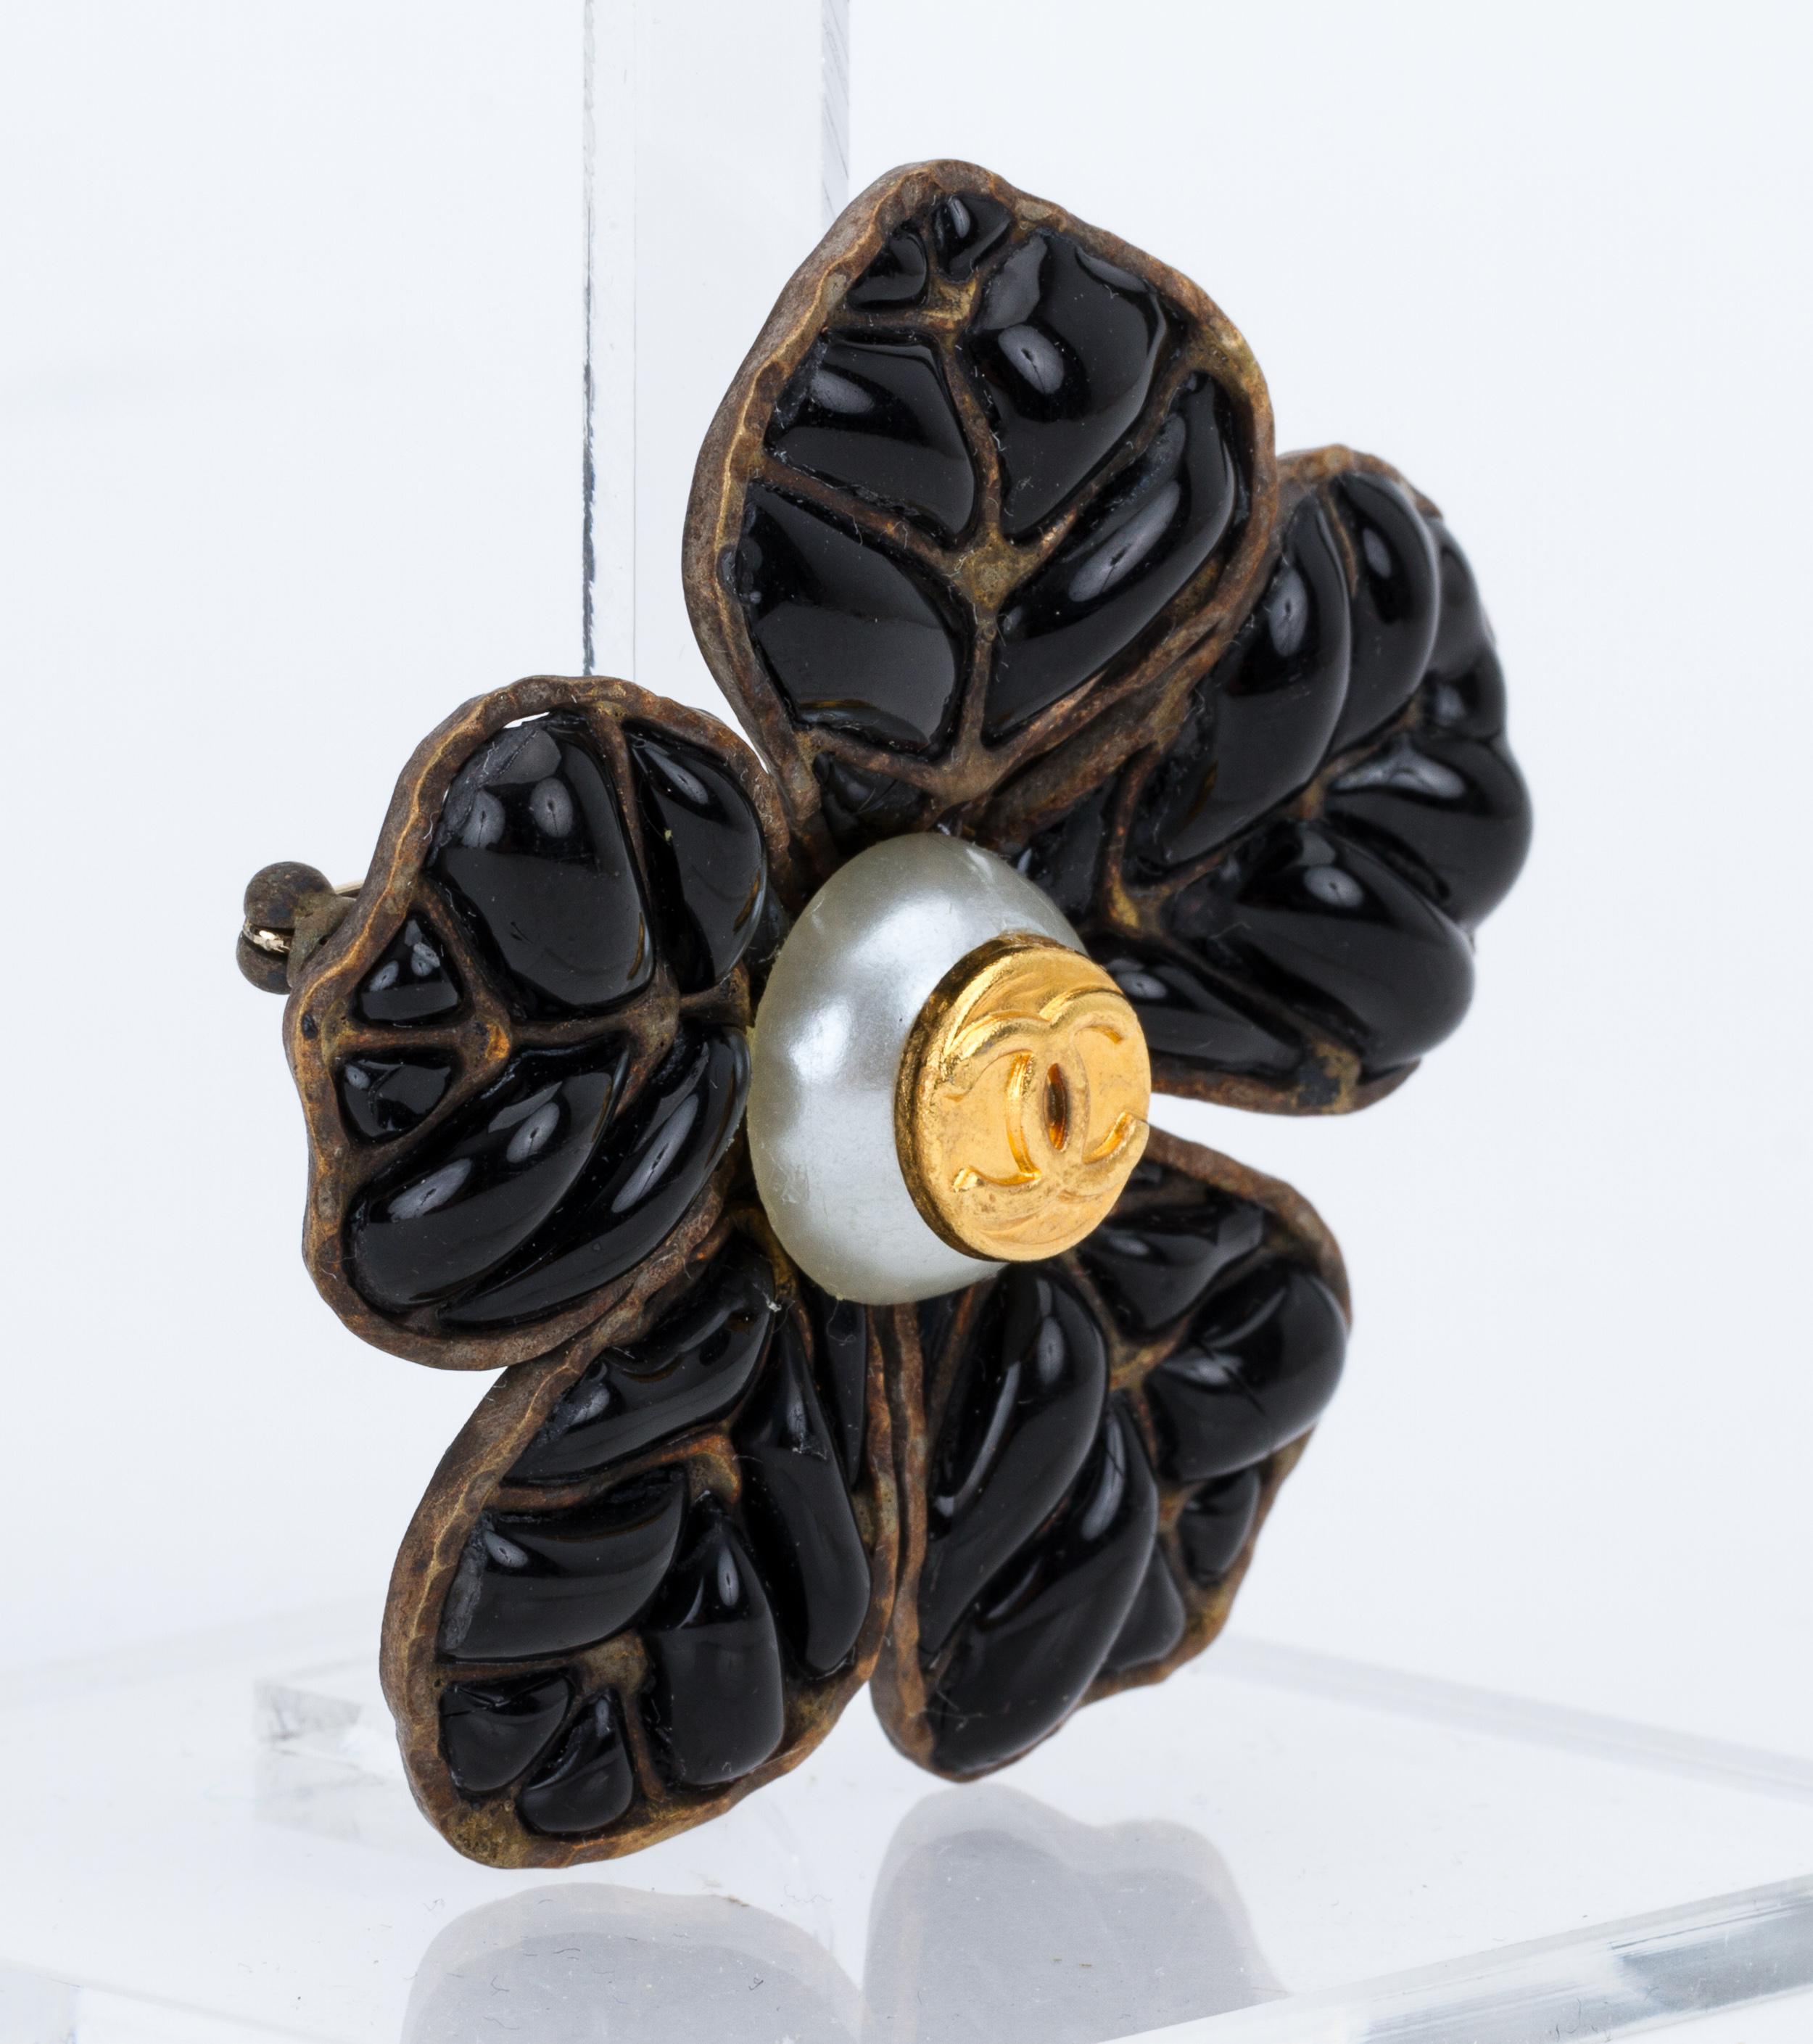 Chanel gripoix black camellia pin . Handmade poured glass with pearl center. Autumn 95 collection. Comes with original box .